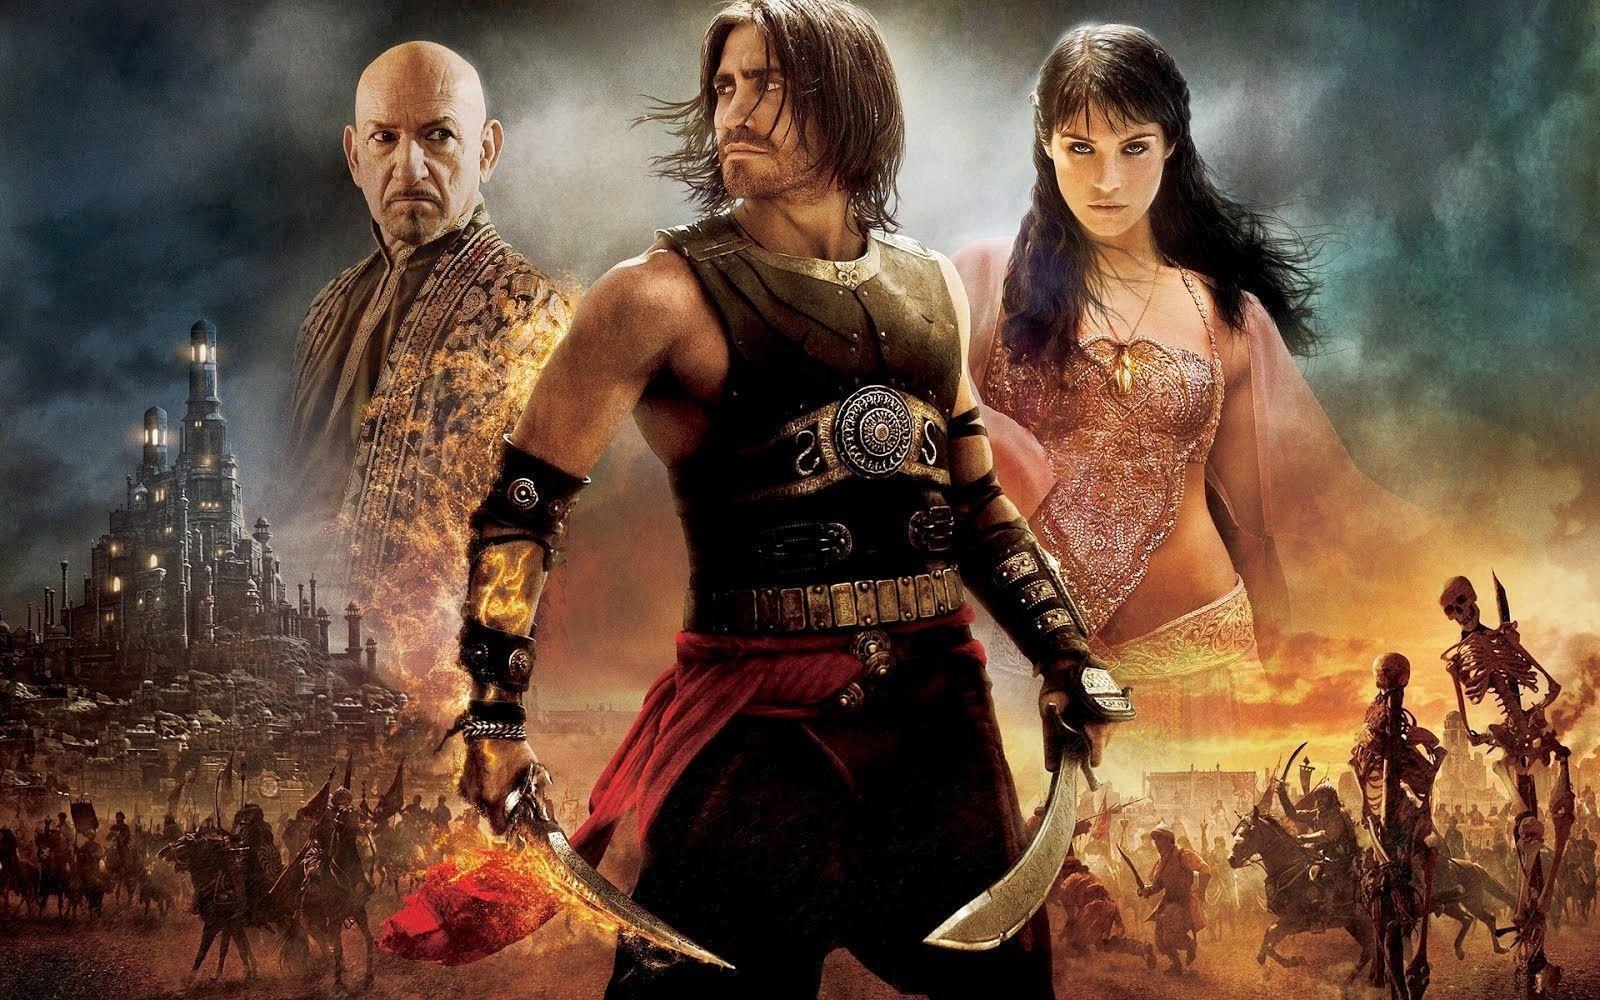 Prince of Persia: The Sands of Time Wallpaper